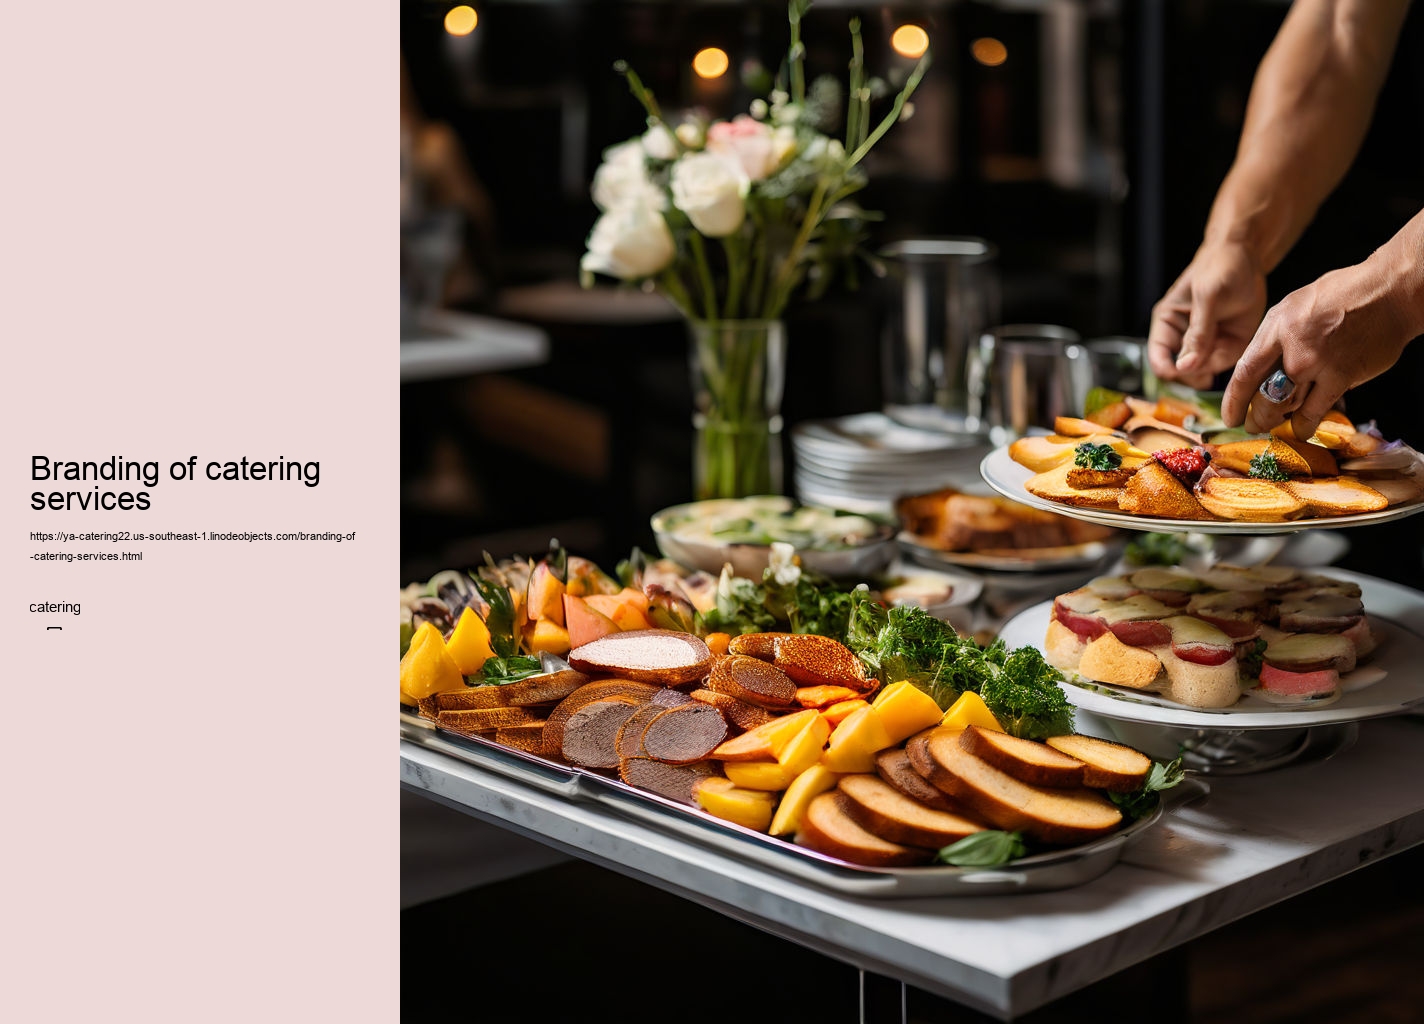 Branding of catering services